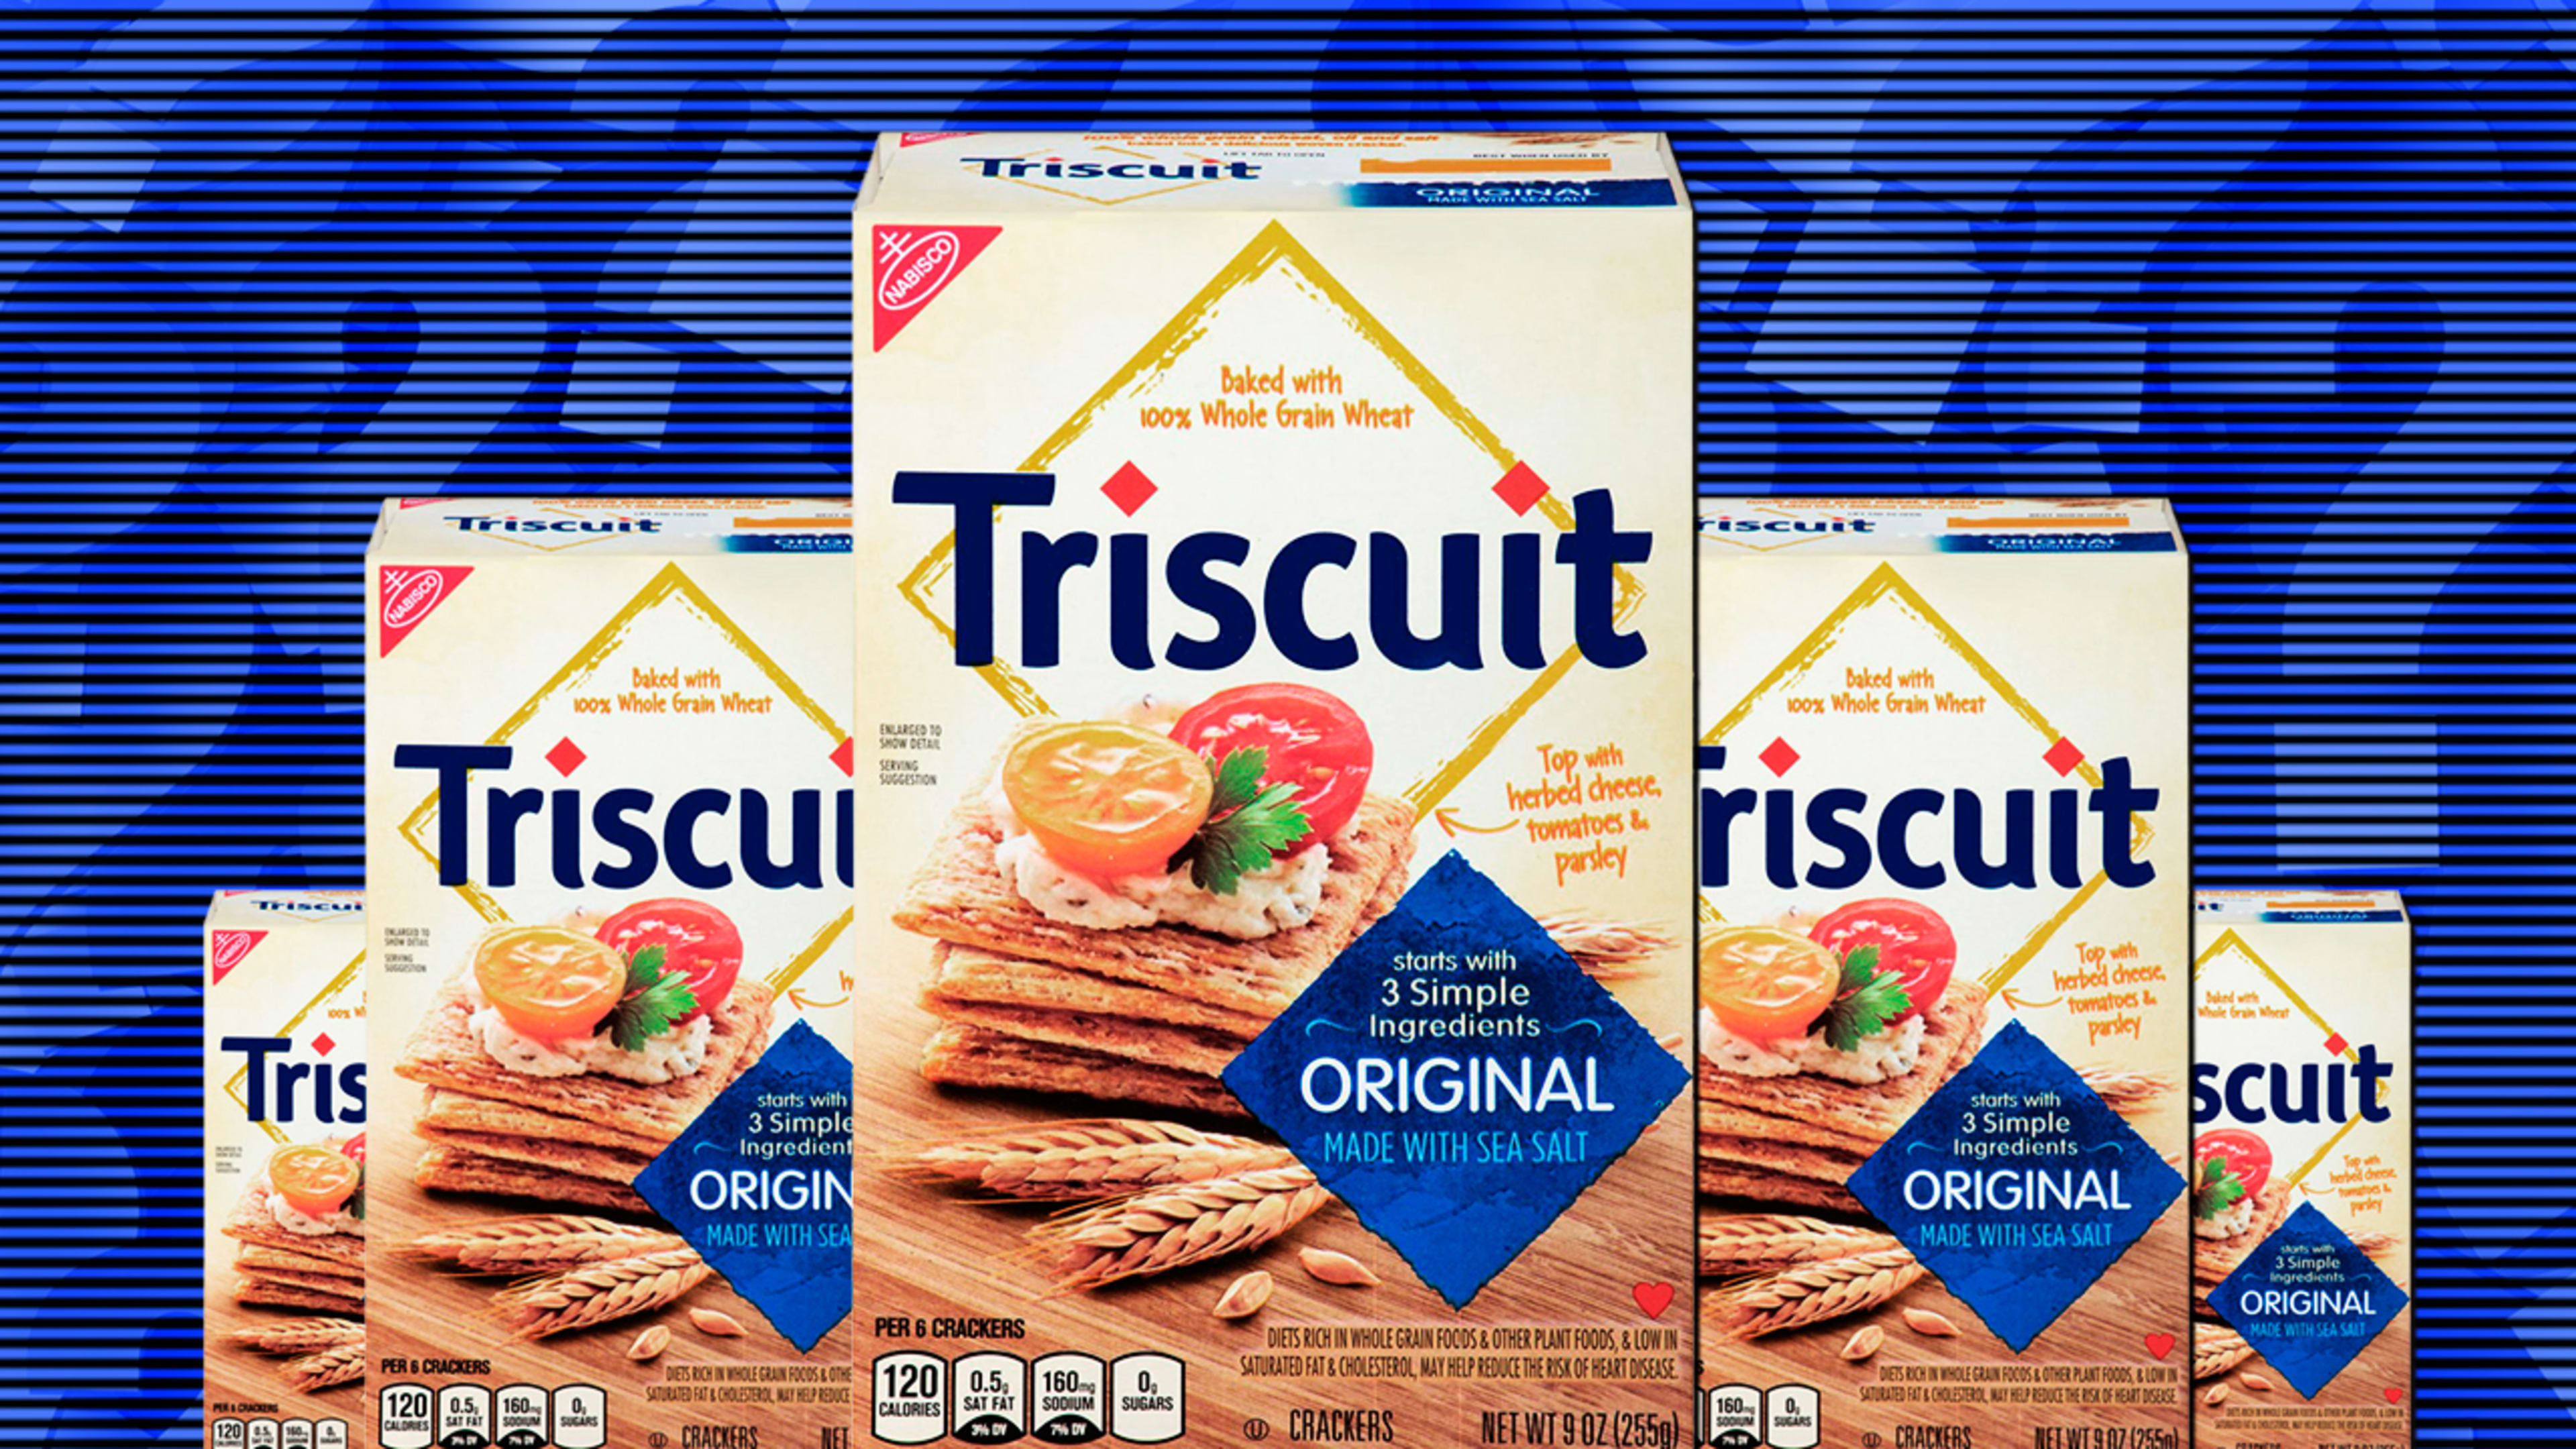 Turns out the word ‘Triscuit’ doesn’t mean what you think it means